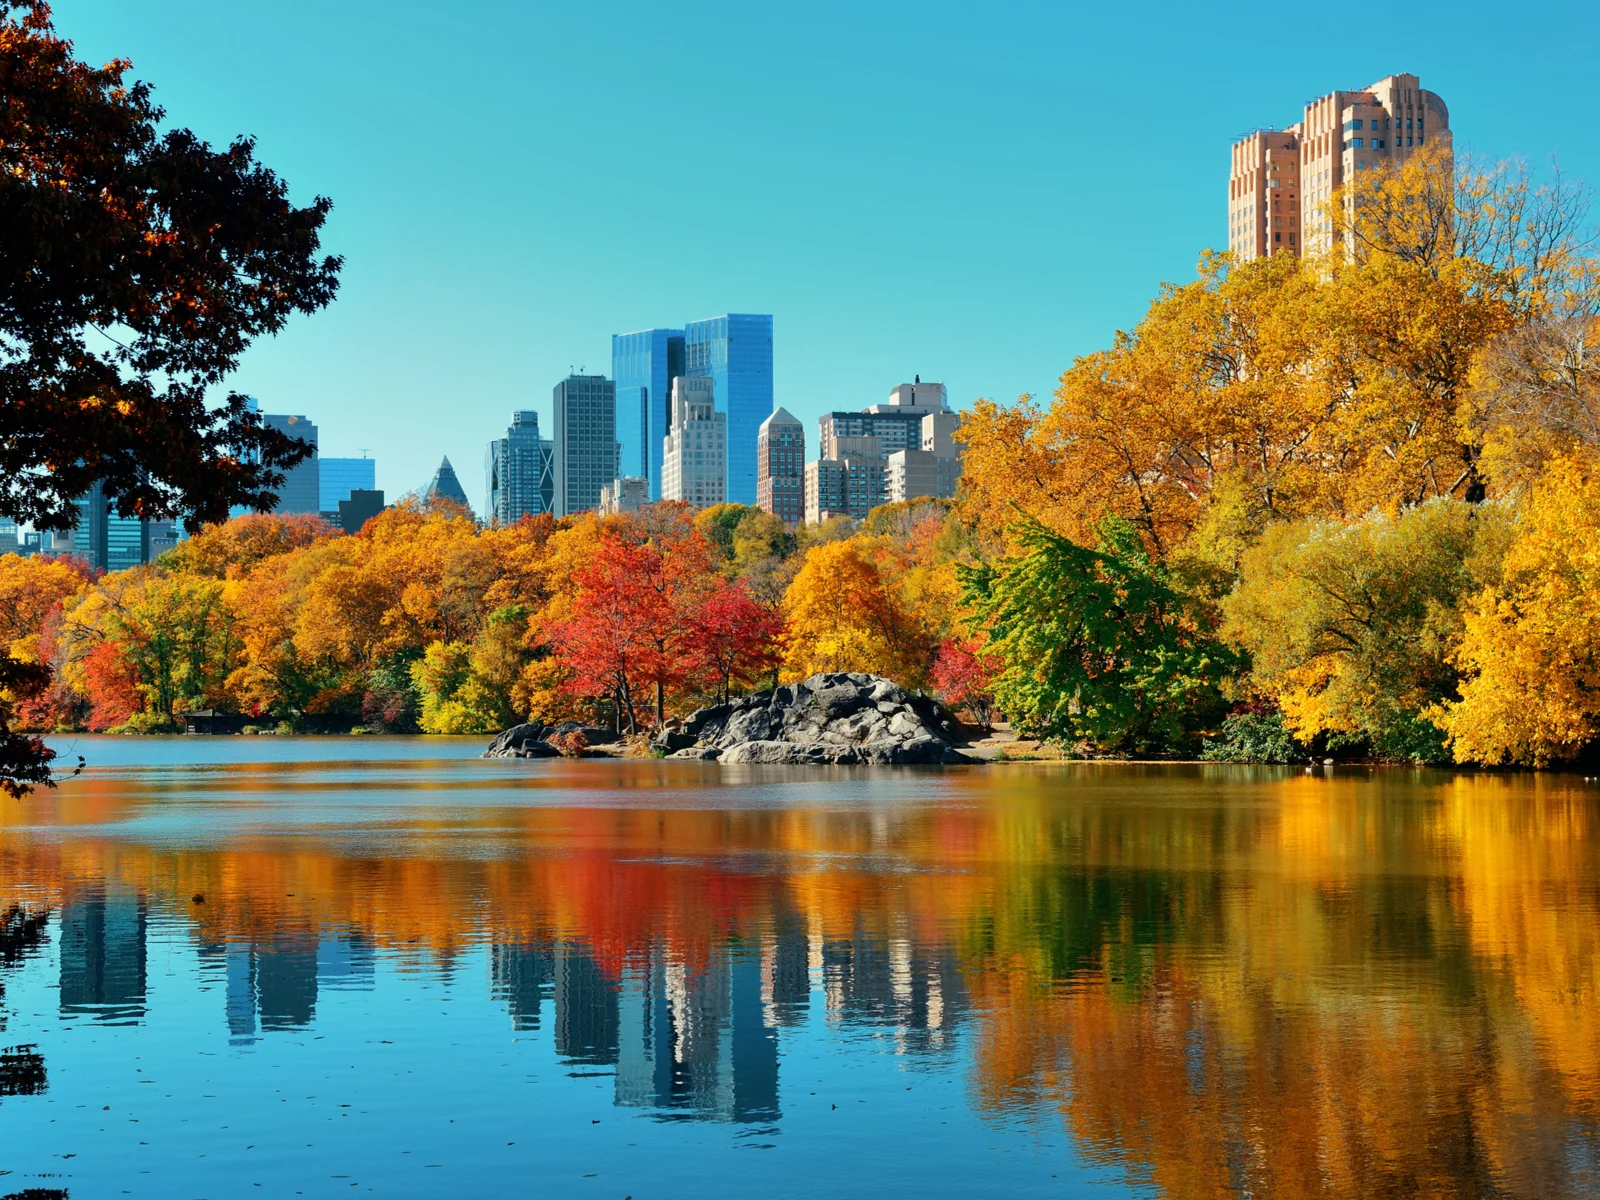 Central Park in autumn pictured with yellow and red trees during the cheapest time to visit New York City